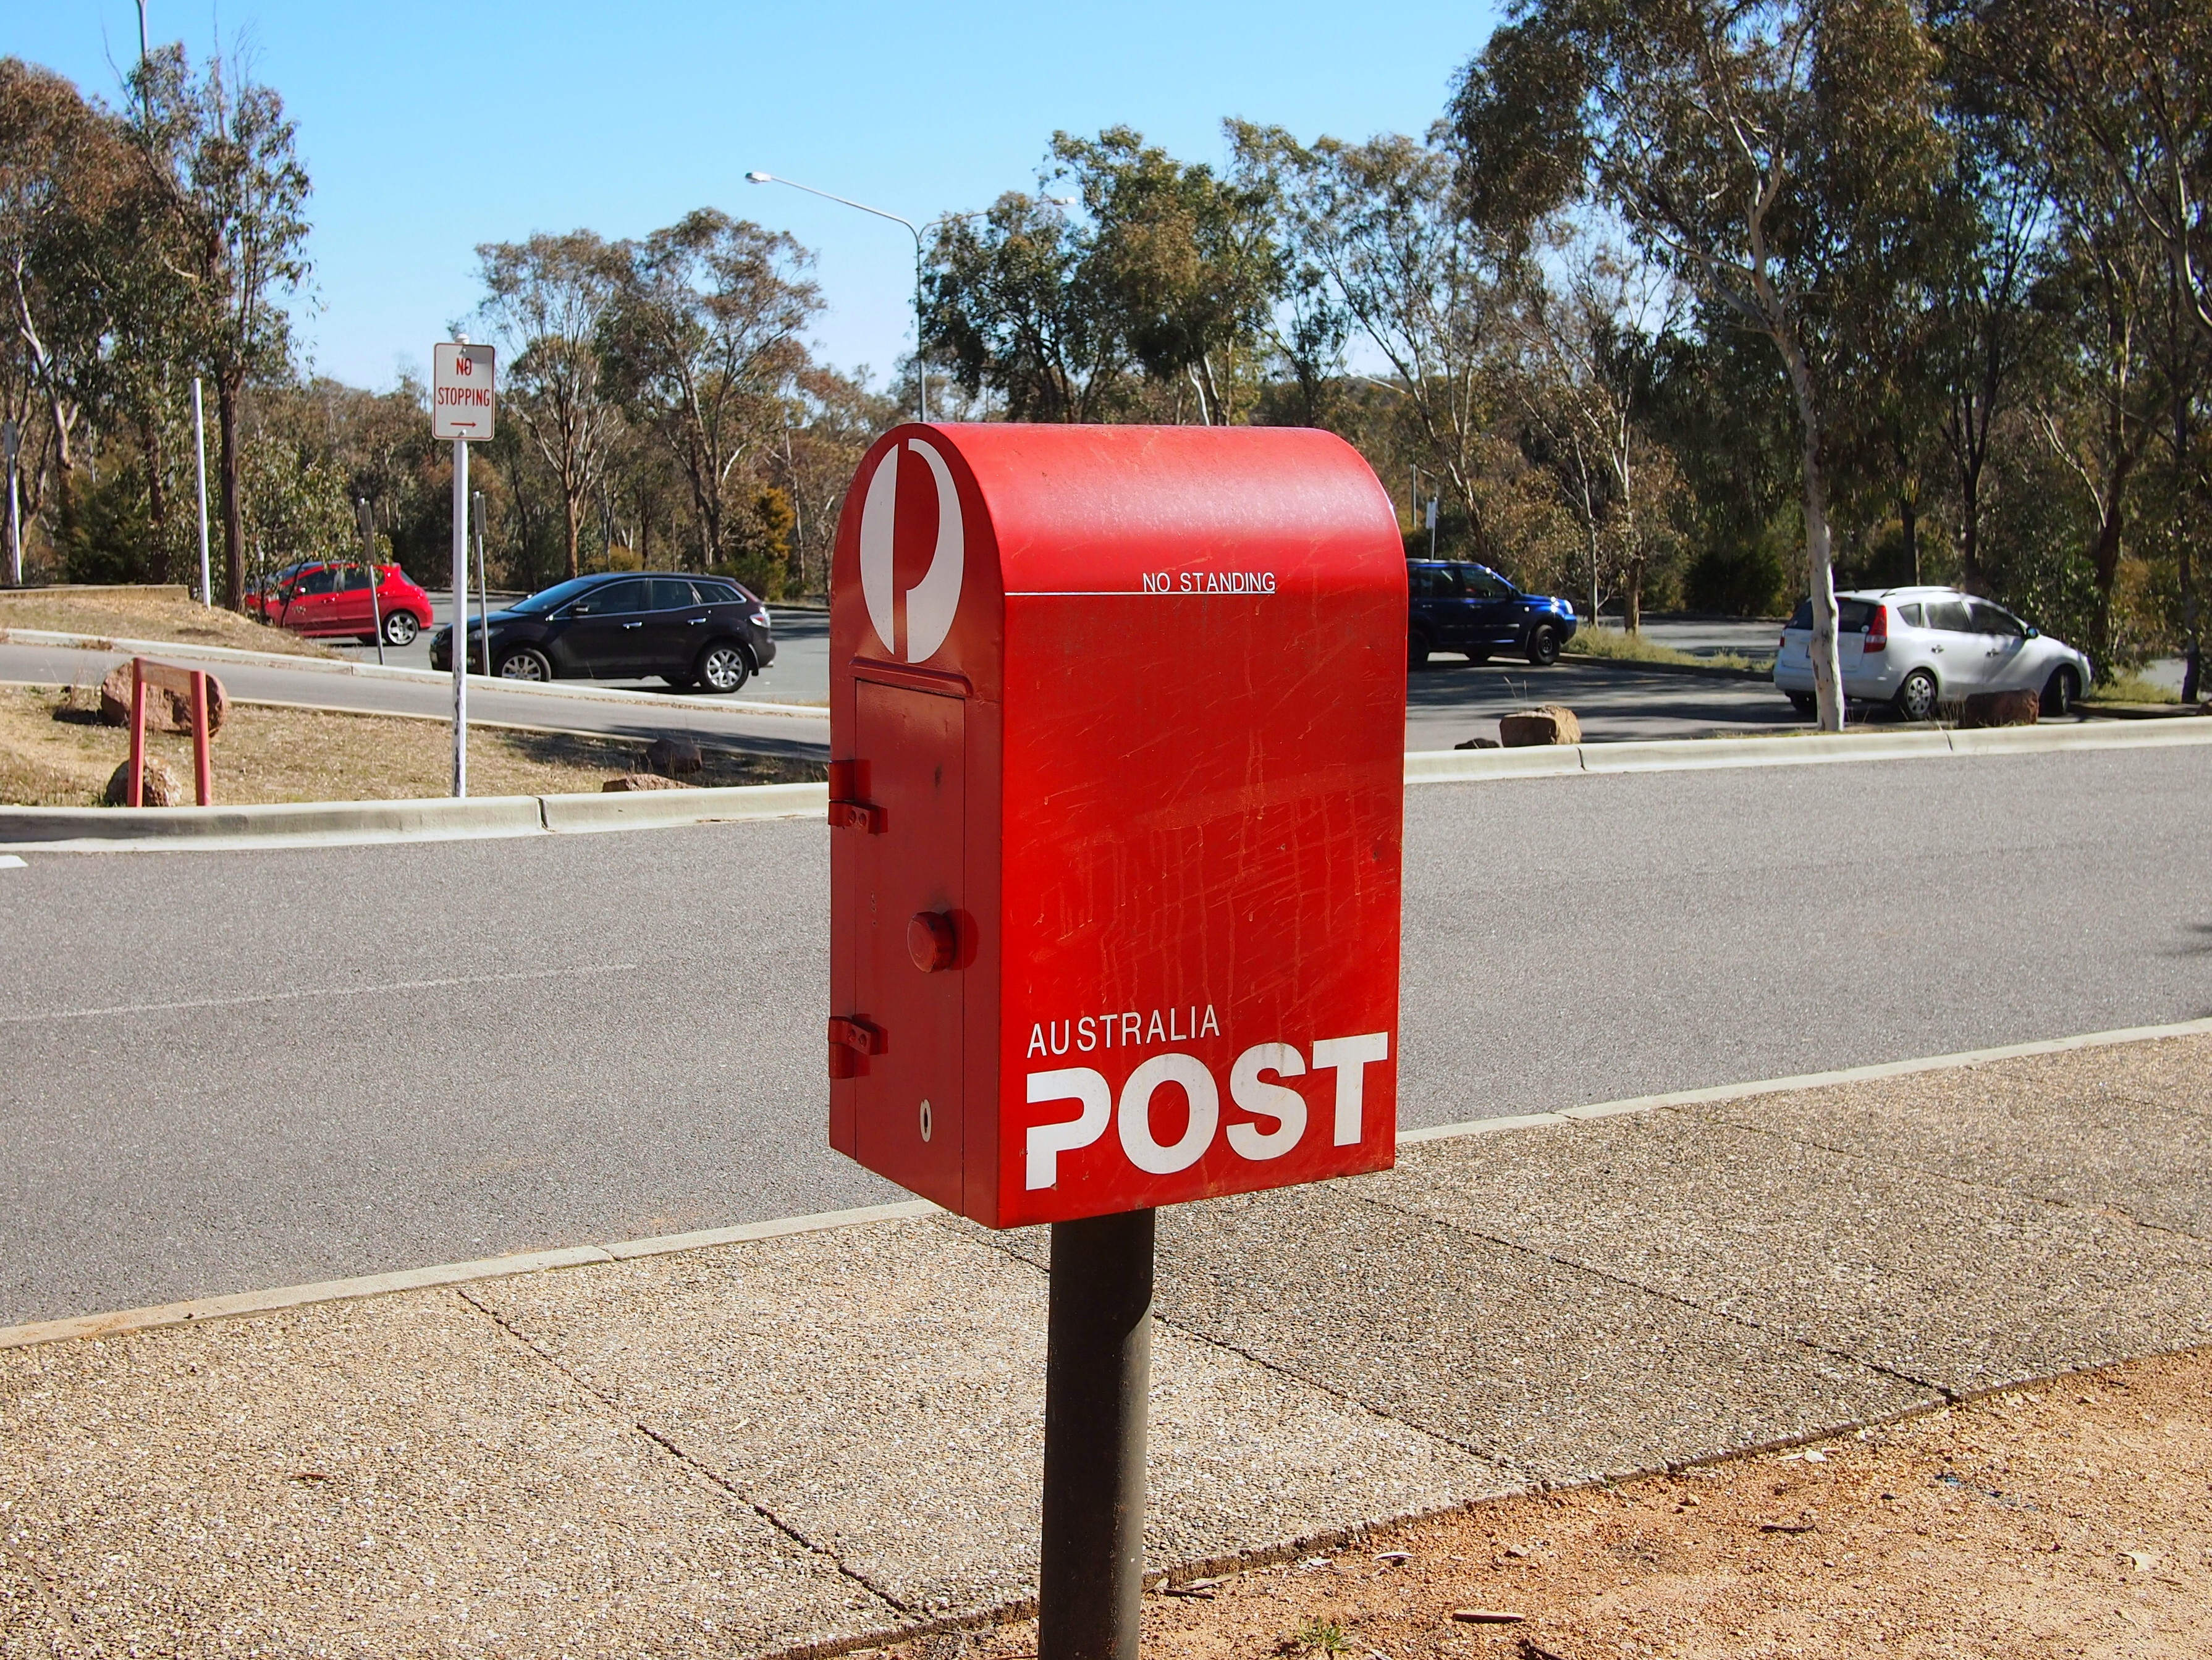 Nearby post boxes